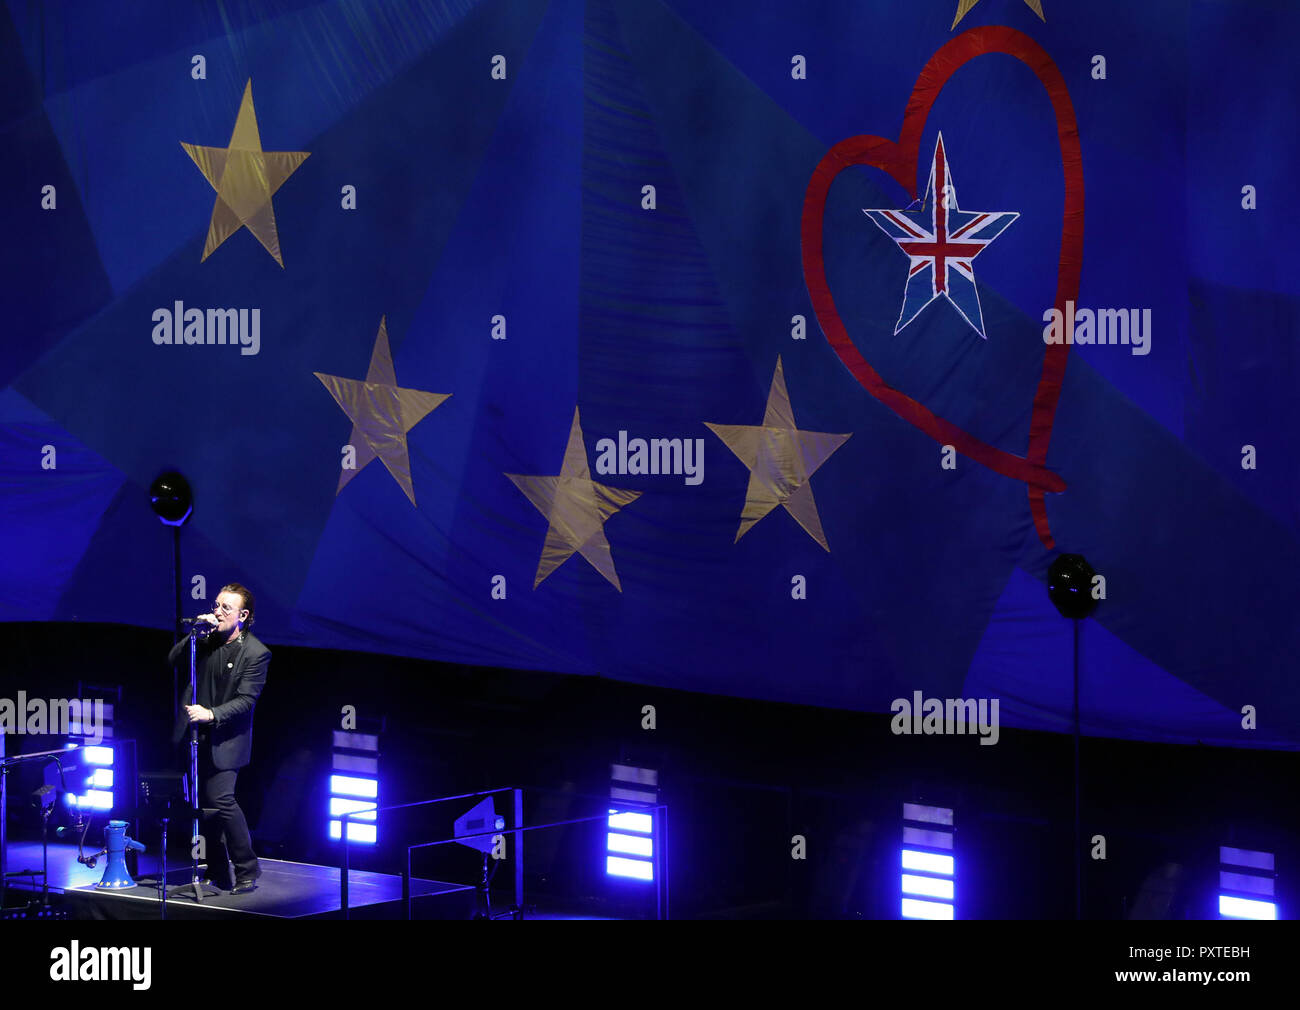 U2's Bono performs in front of a giant EU flag, with one star as the Union Flag, at the o2 Arena in London, during their eXPERIENCE + iNNOCENCE Tour. Stock Photo